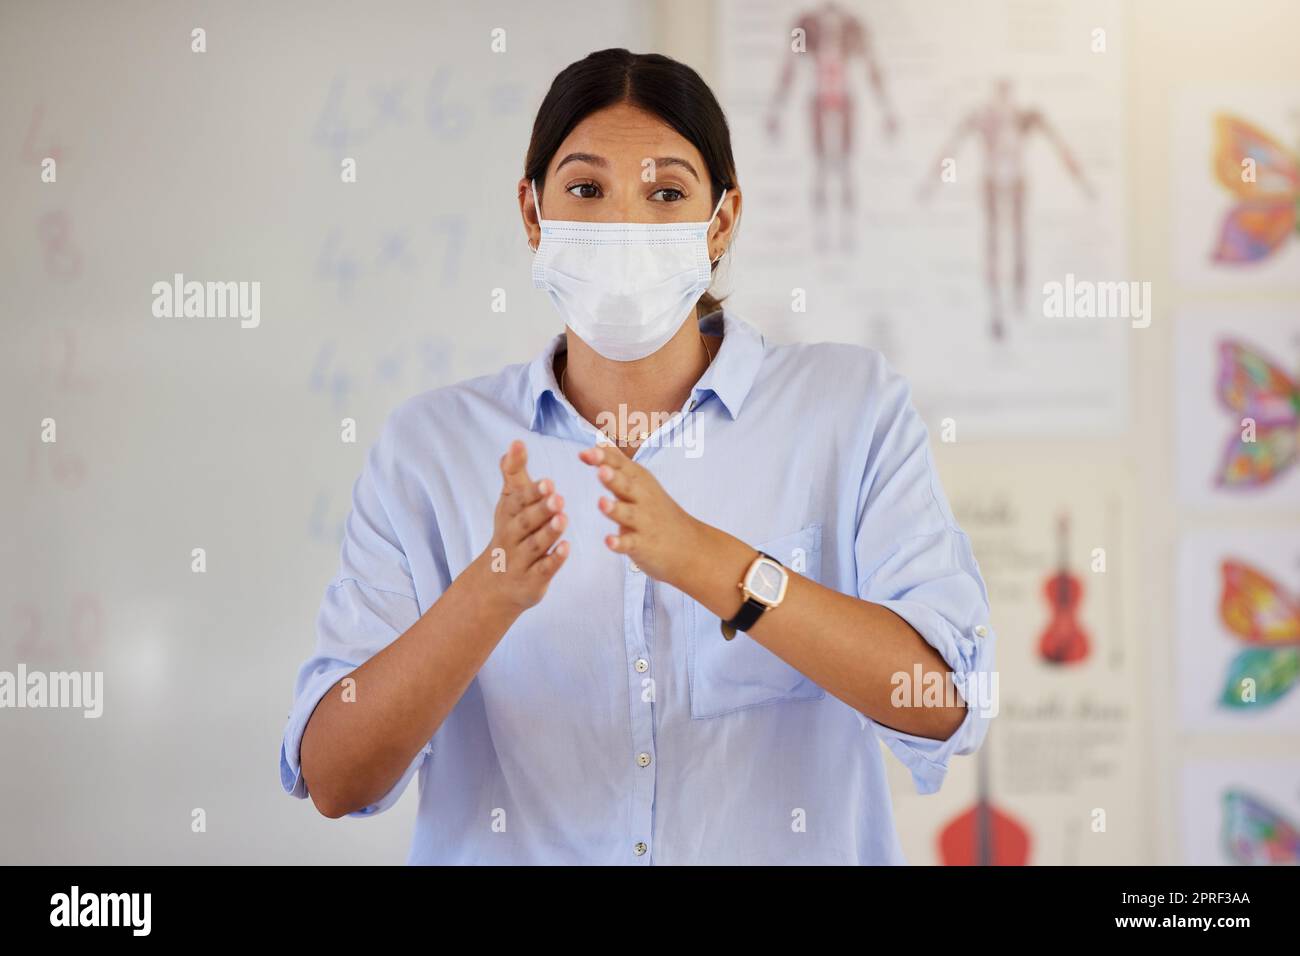 Pandemic, mask and doctor talking at school career presentation or parent and teacher meeting. Covid protocol and restrictions in education for illness protection for staff and children at risk. Stock Photo